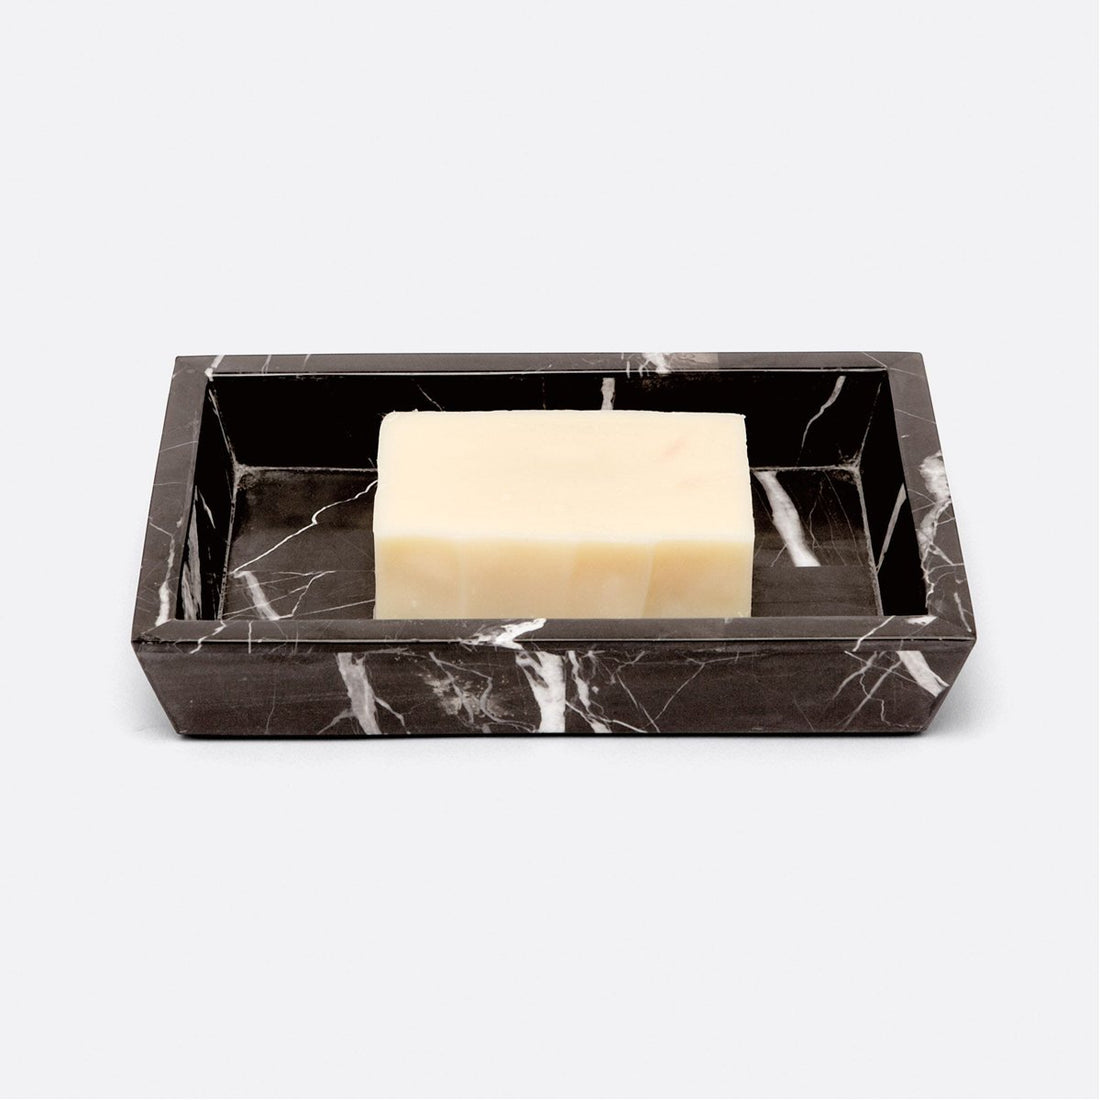 Pigeon and Poodle Rhodes Rectangular Nero Soap Dish, Tapered